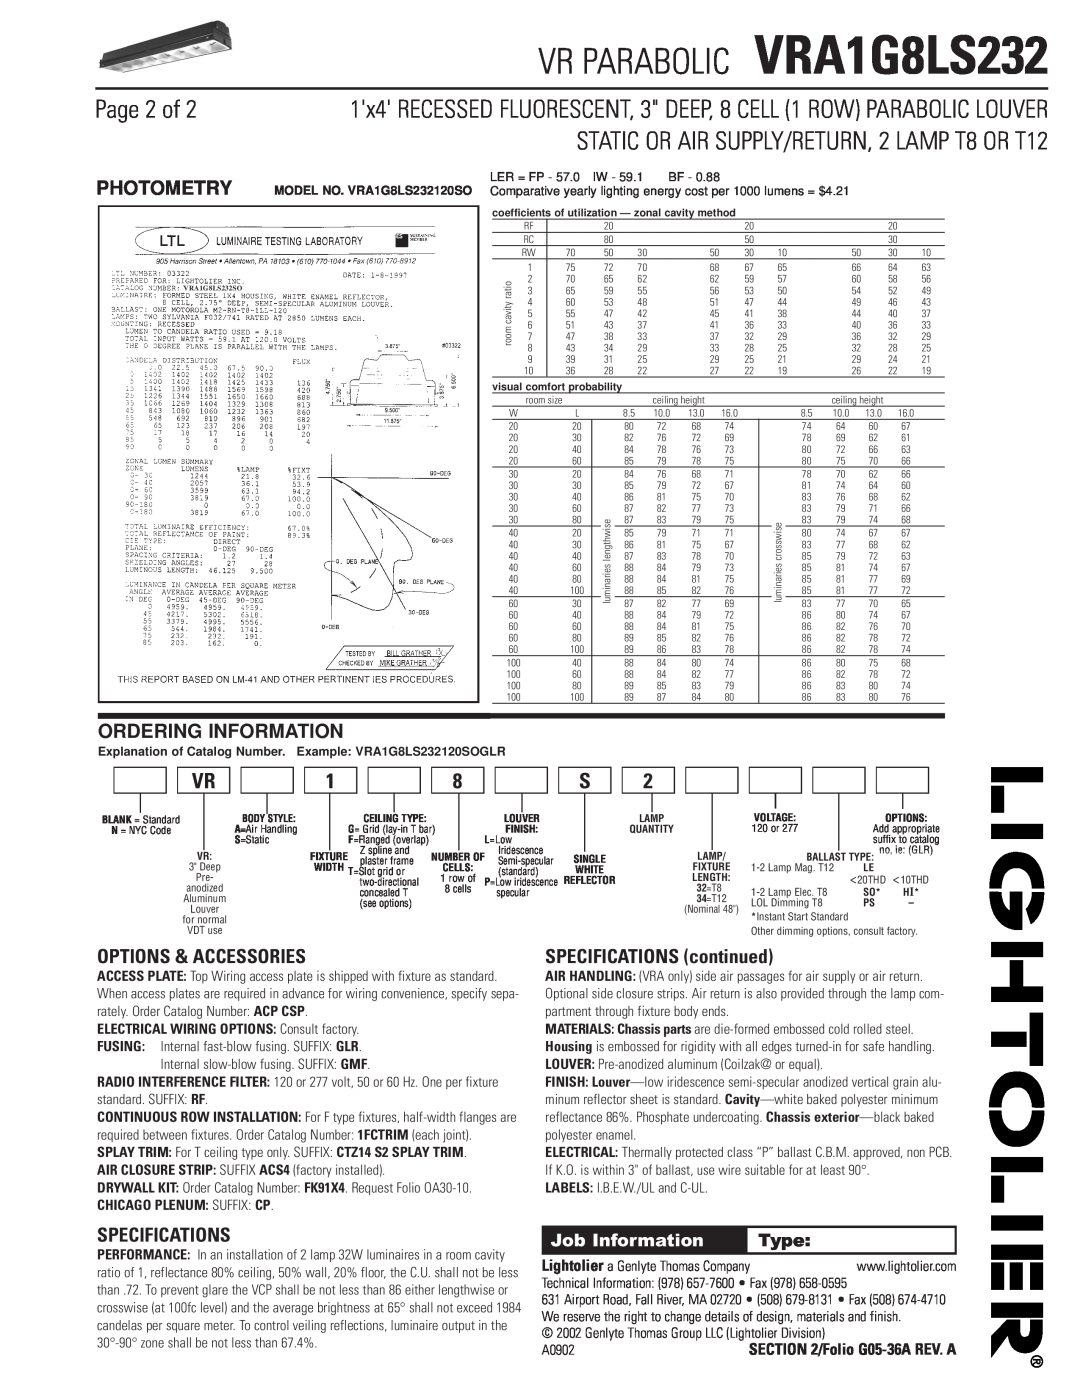 Lightolier VRA1G8LS232 Page 2 of, Options & Accessories, Specifications, SPECIFICATIONS continued, Ordering Information 